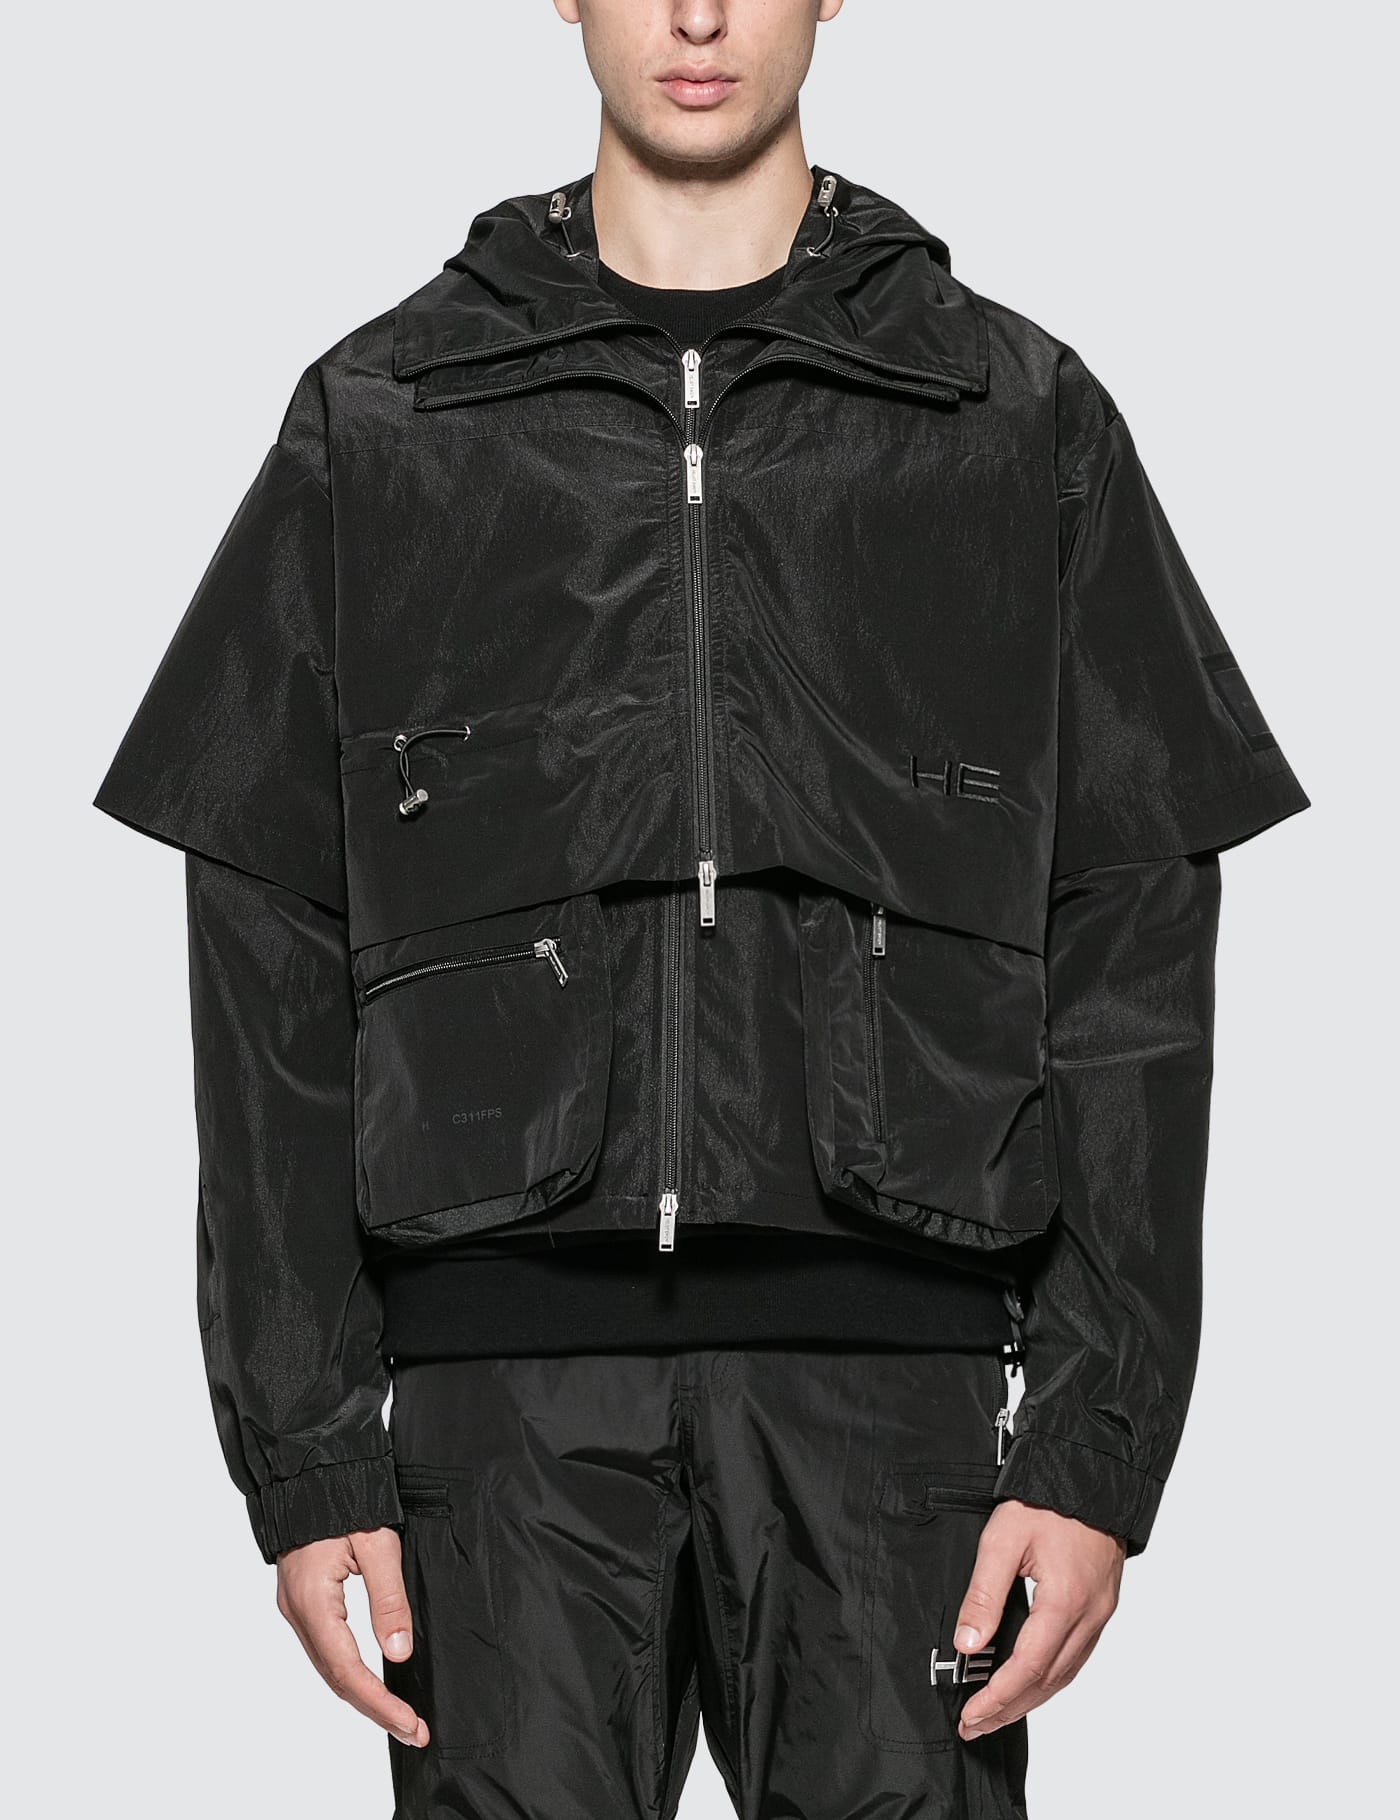 Heliot Emil - Technical Jacket | HBX - Globally Curated Fashion